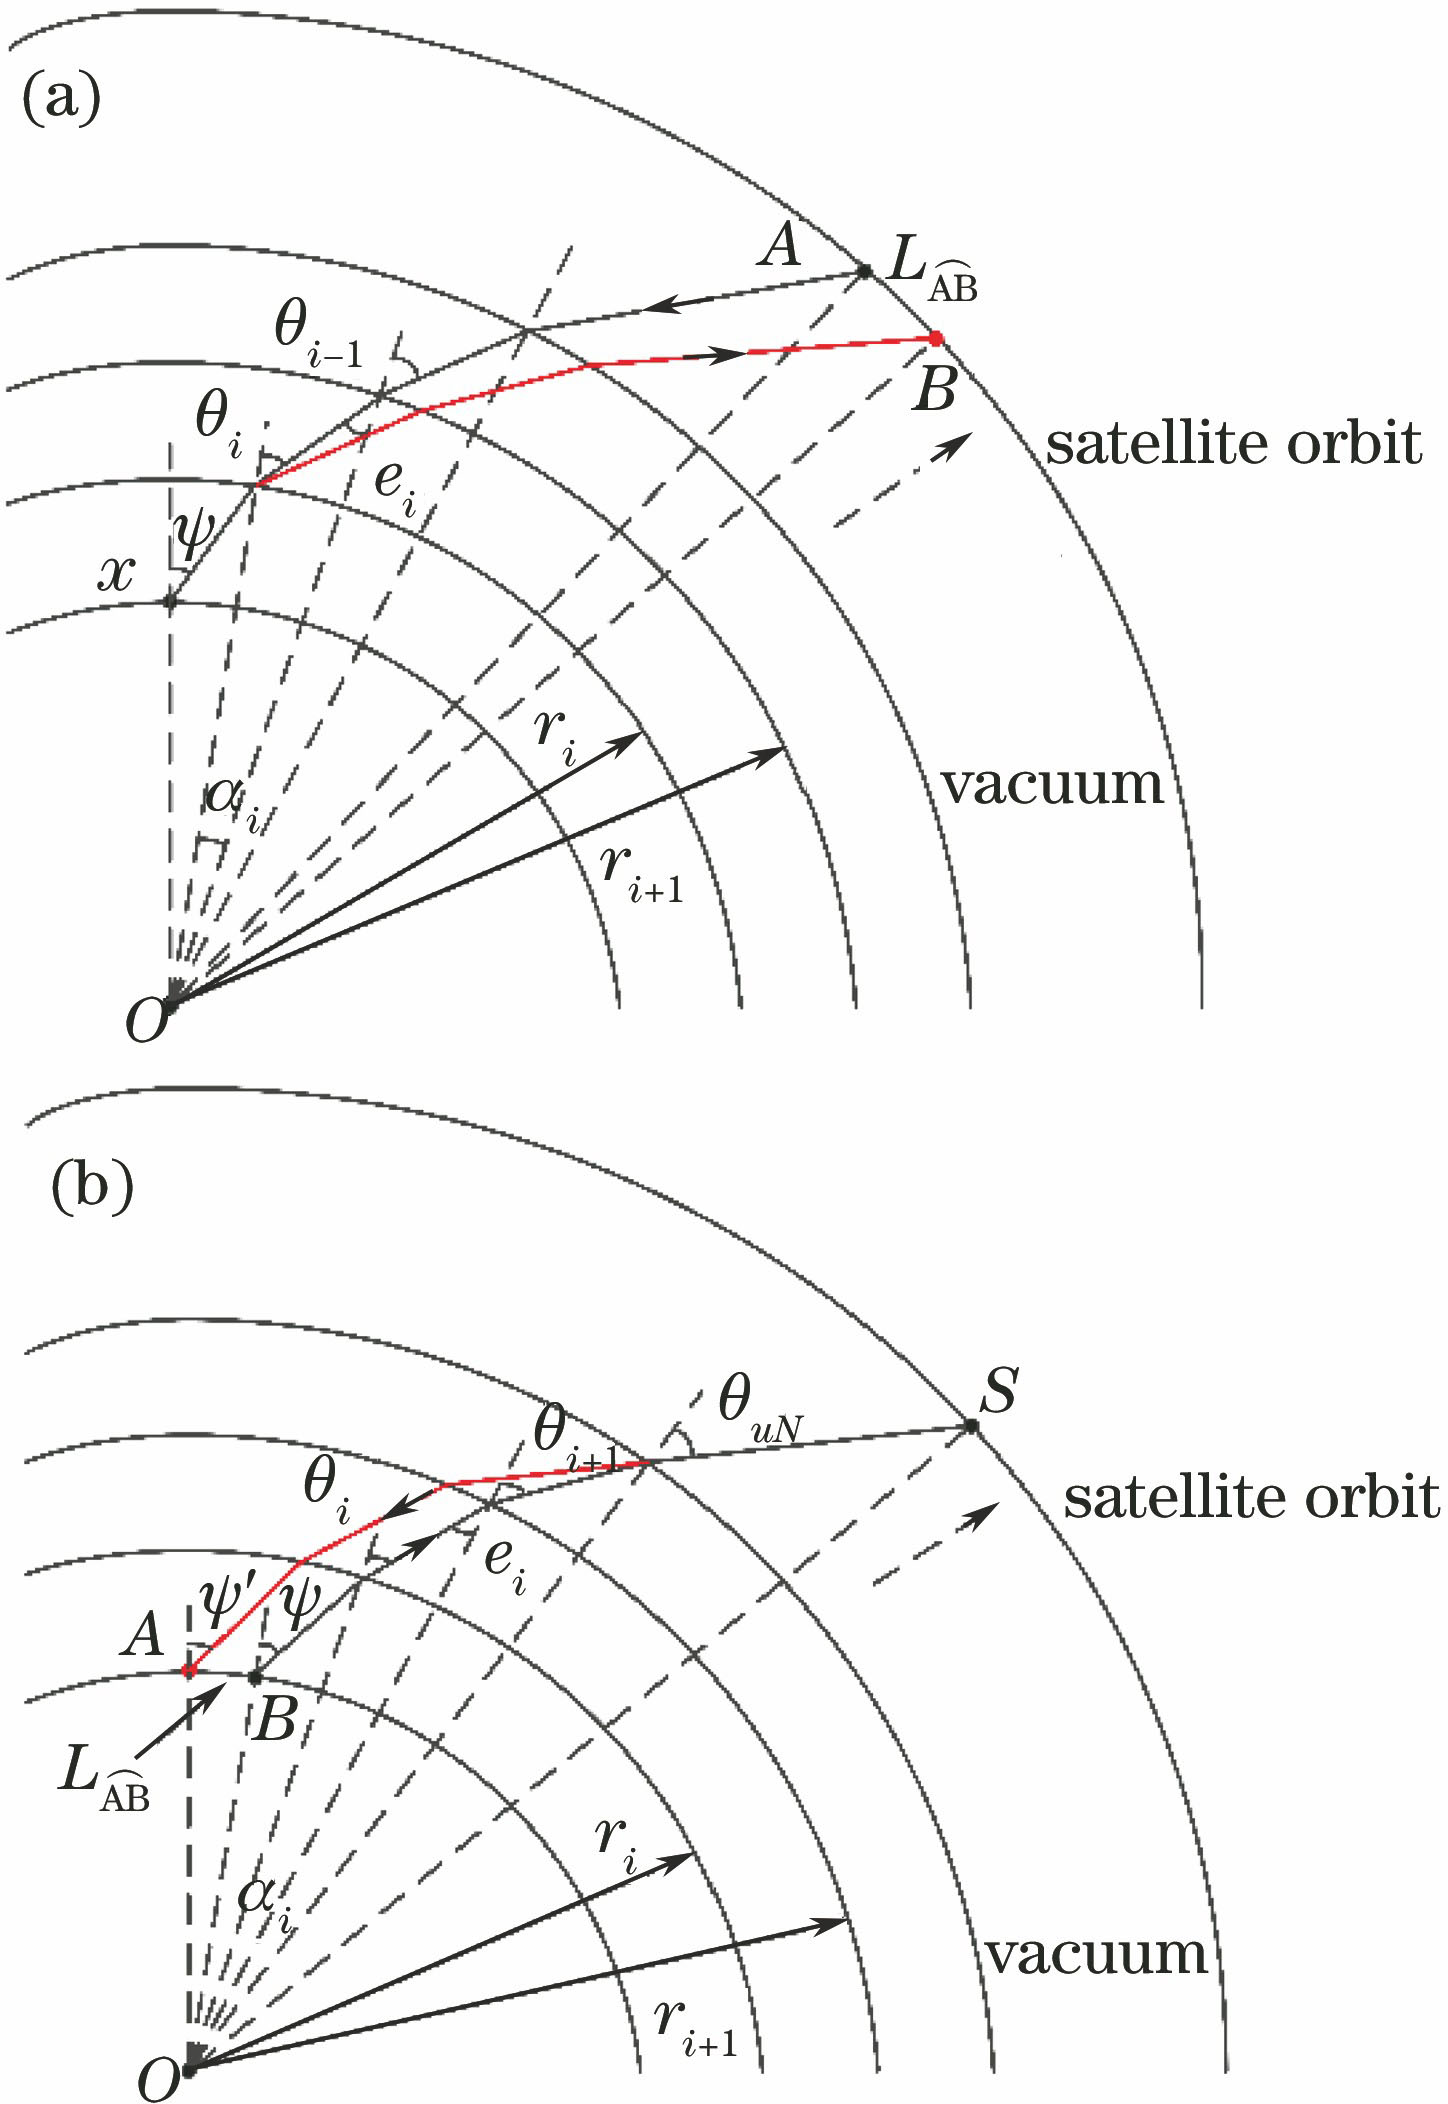 Schematic diagram of time transfer by space laser link at double wavelengths. (a) Ground terminal capturing mode; (b) satellite terminal capturing mode